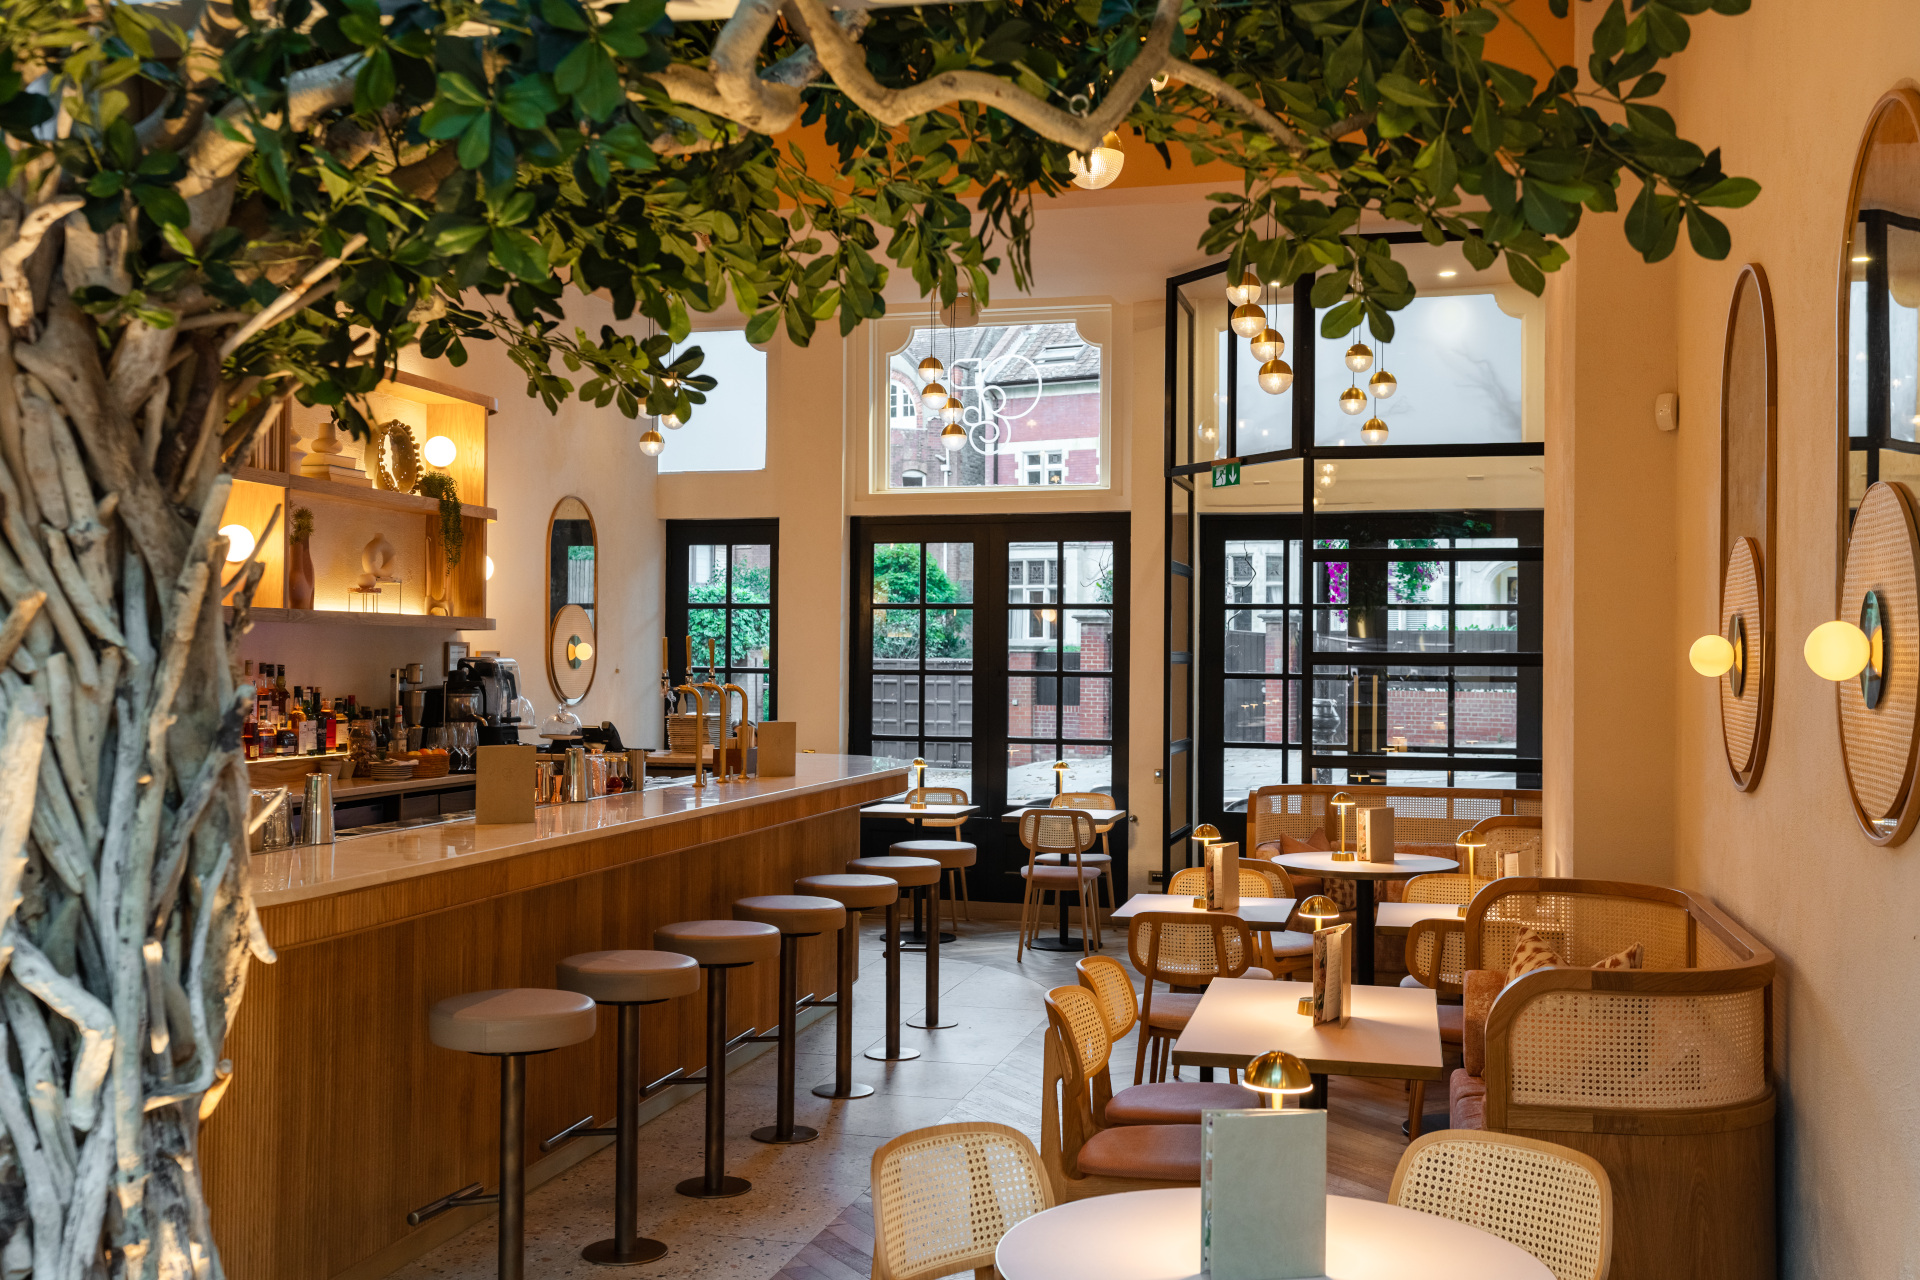 Oak & poppy restaurant and bar interior with trees and warm lighting